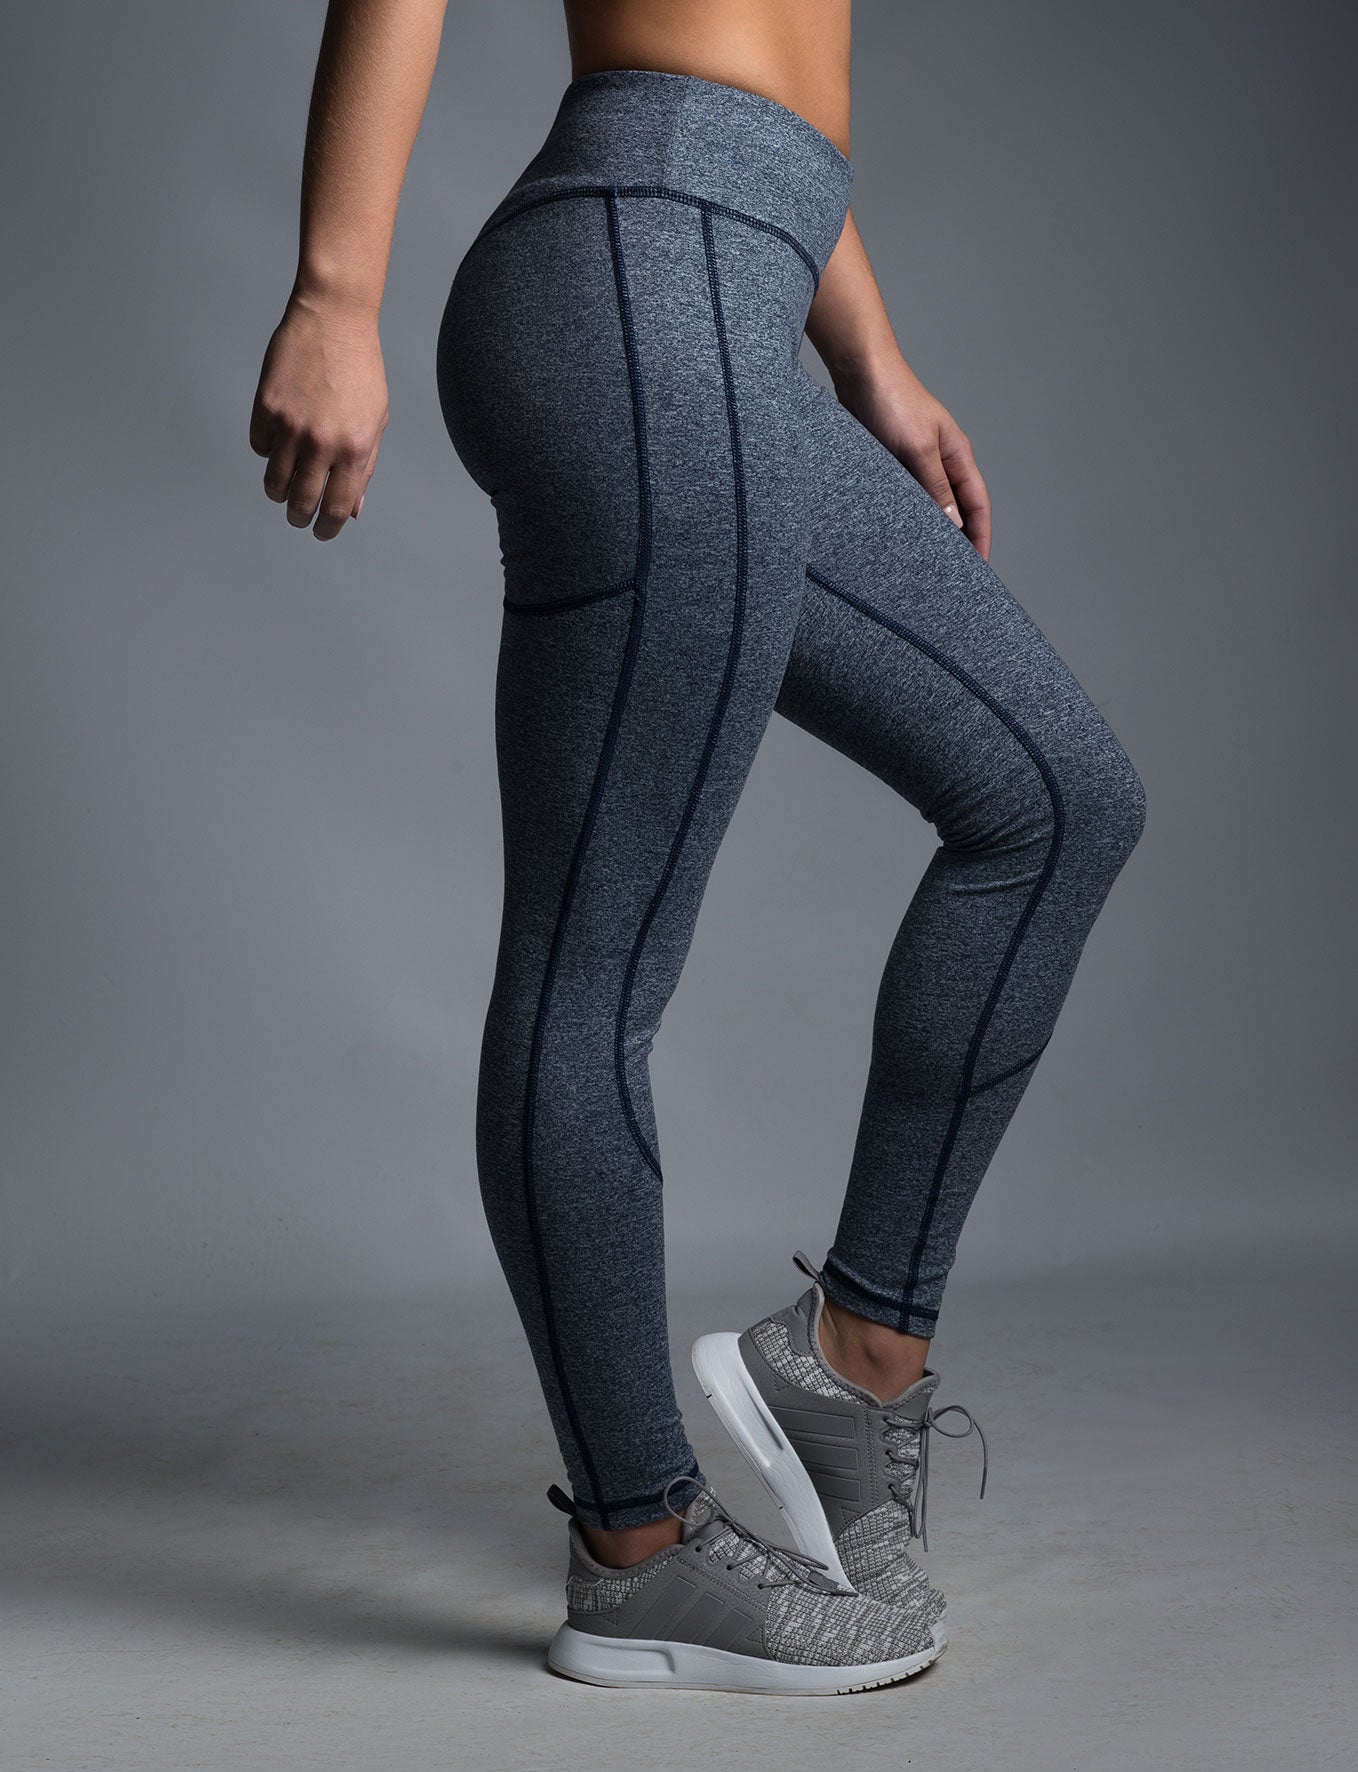 CompressionZ Women's Leggings - Smart, Flexible Compression for Yoga,  Running, Fitness & Everyday Wear (Carbon Heather Gray, Small) : Amazon.in:  Clothing & Accessories